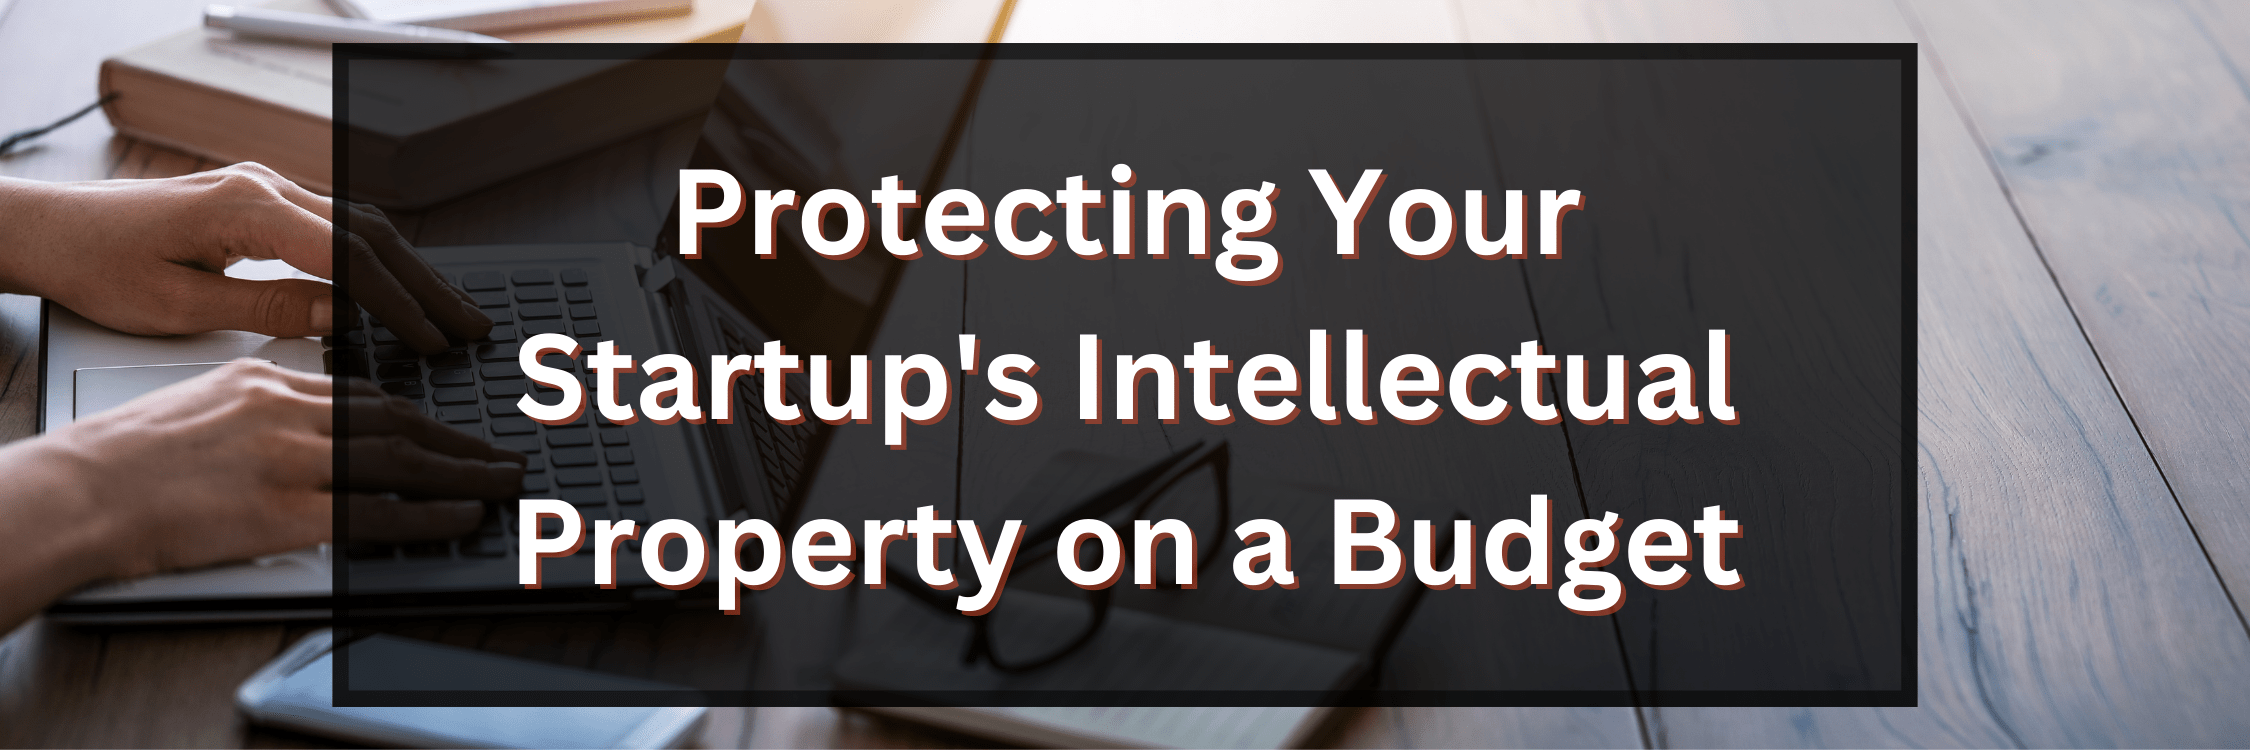 Protecting Your Startups Intellectual Property On A Budget